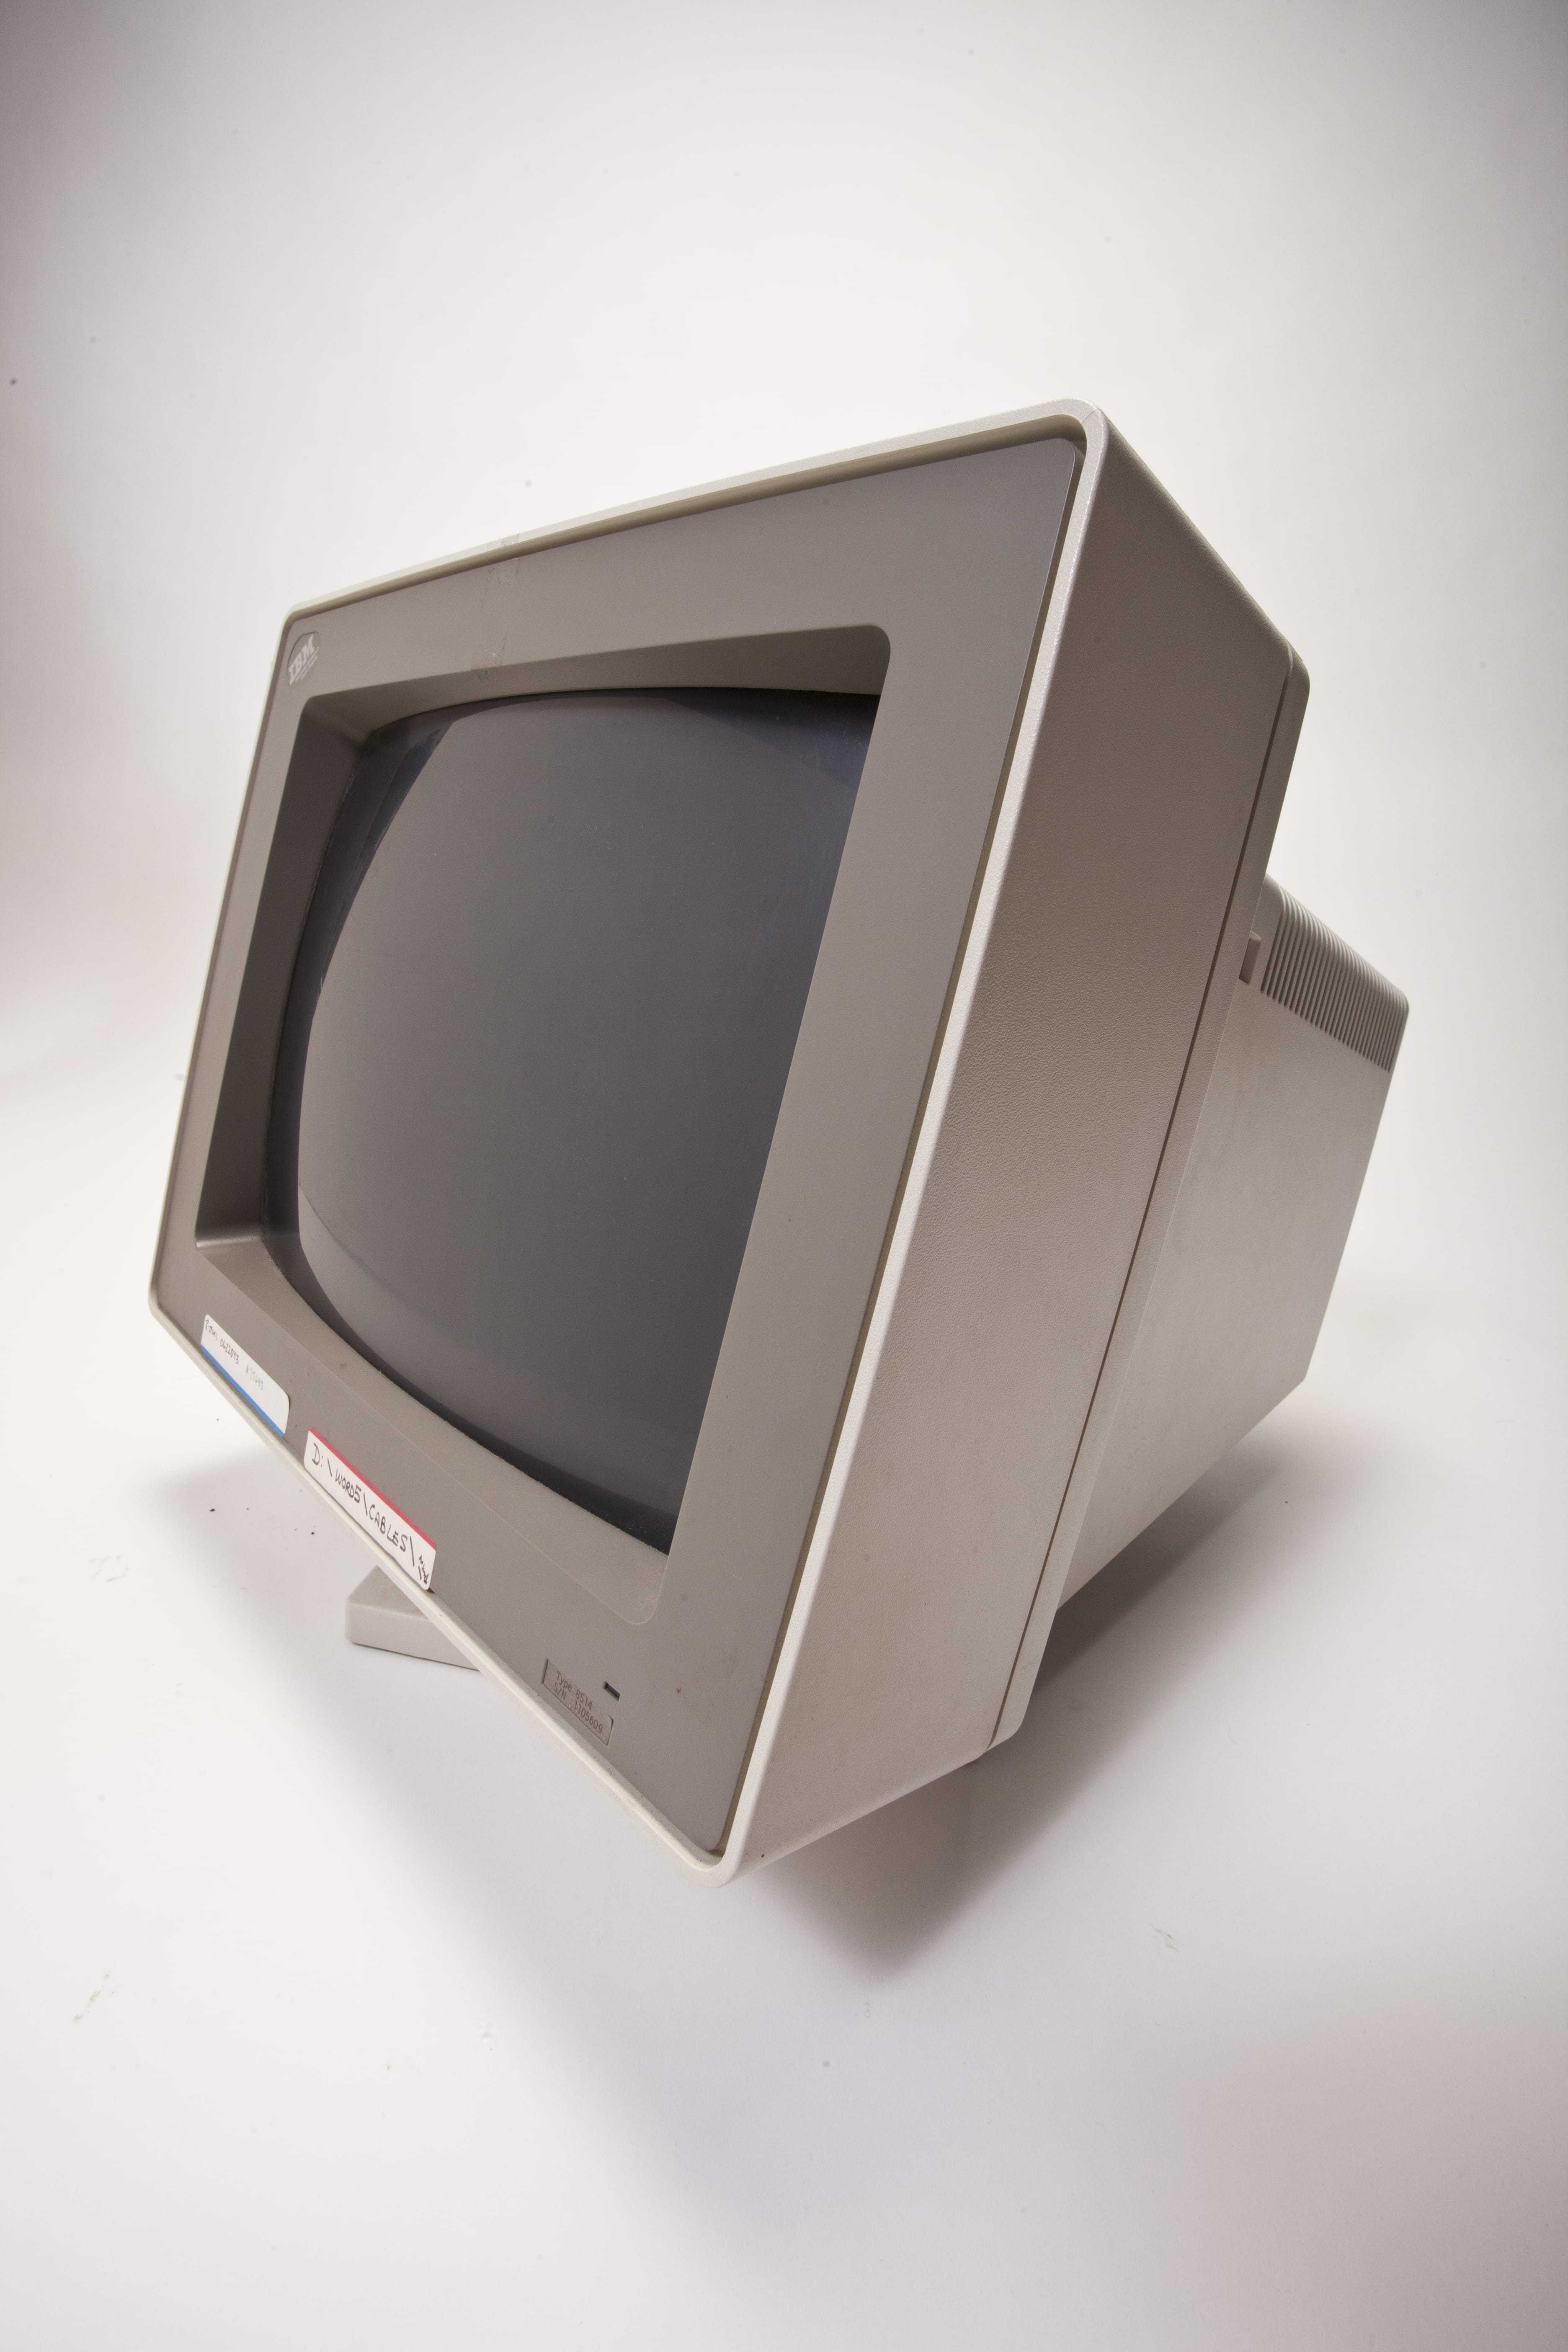 A large, square computer monitor.